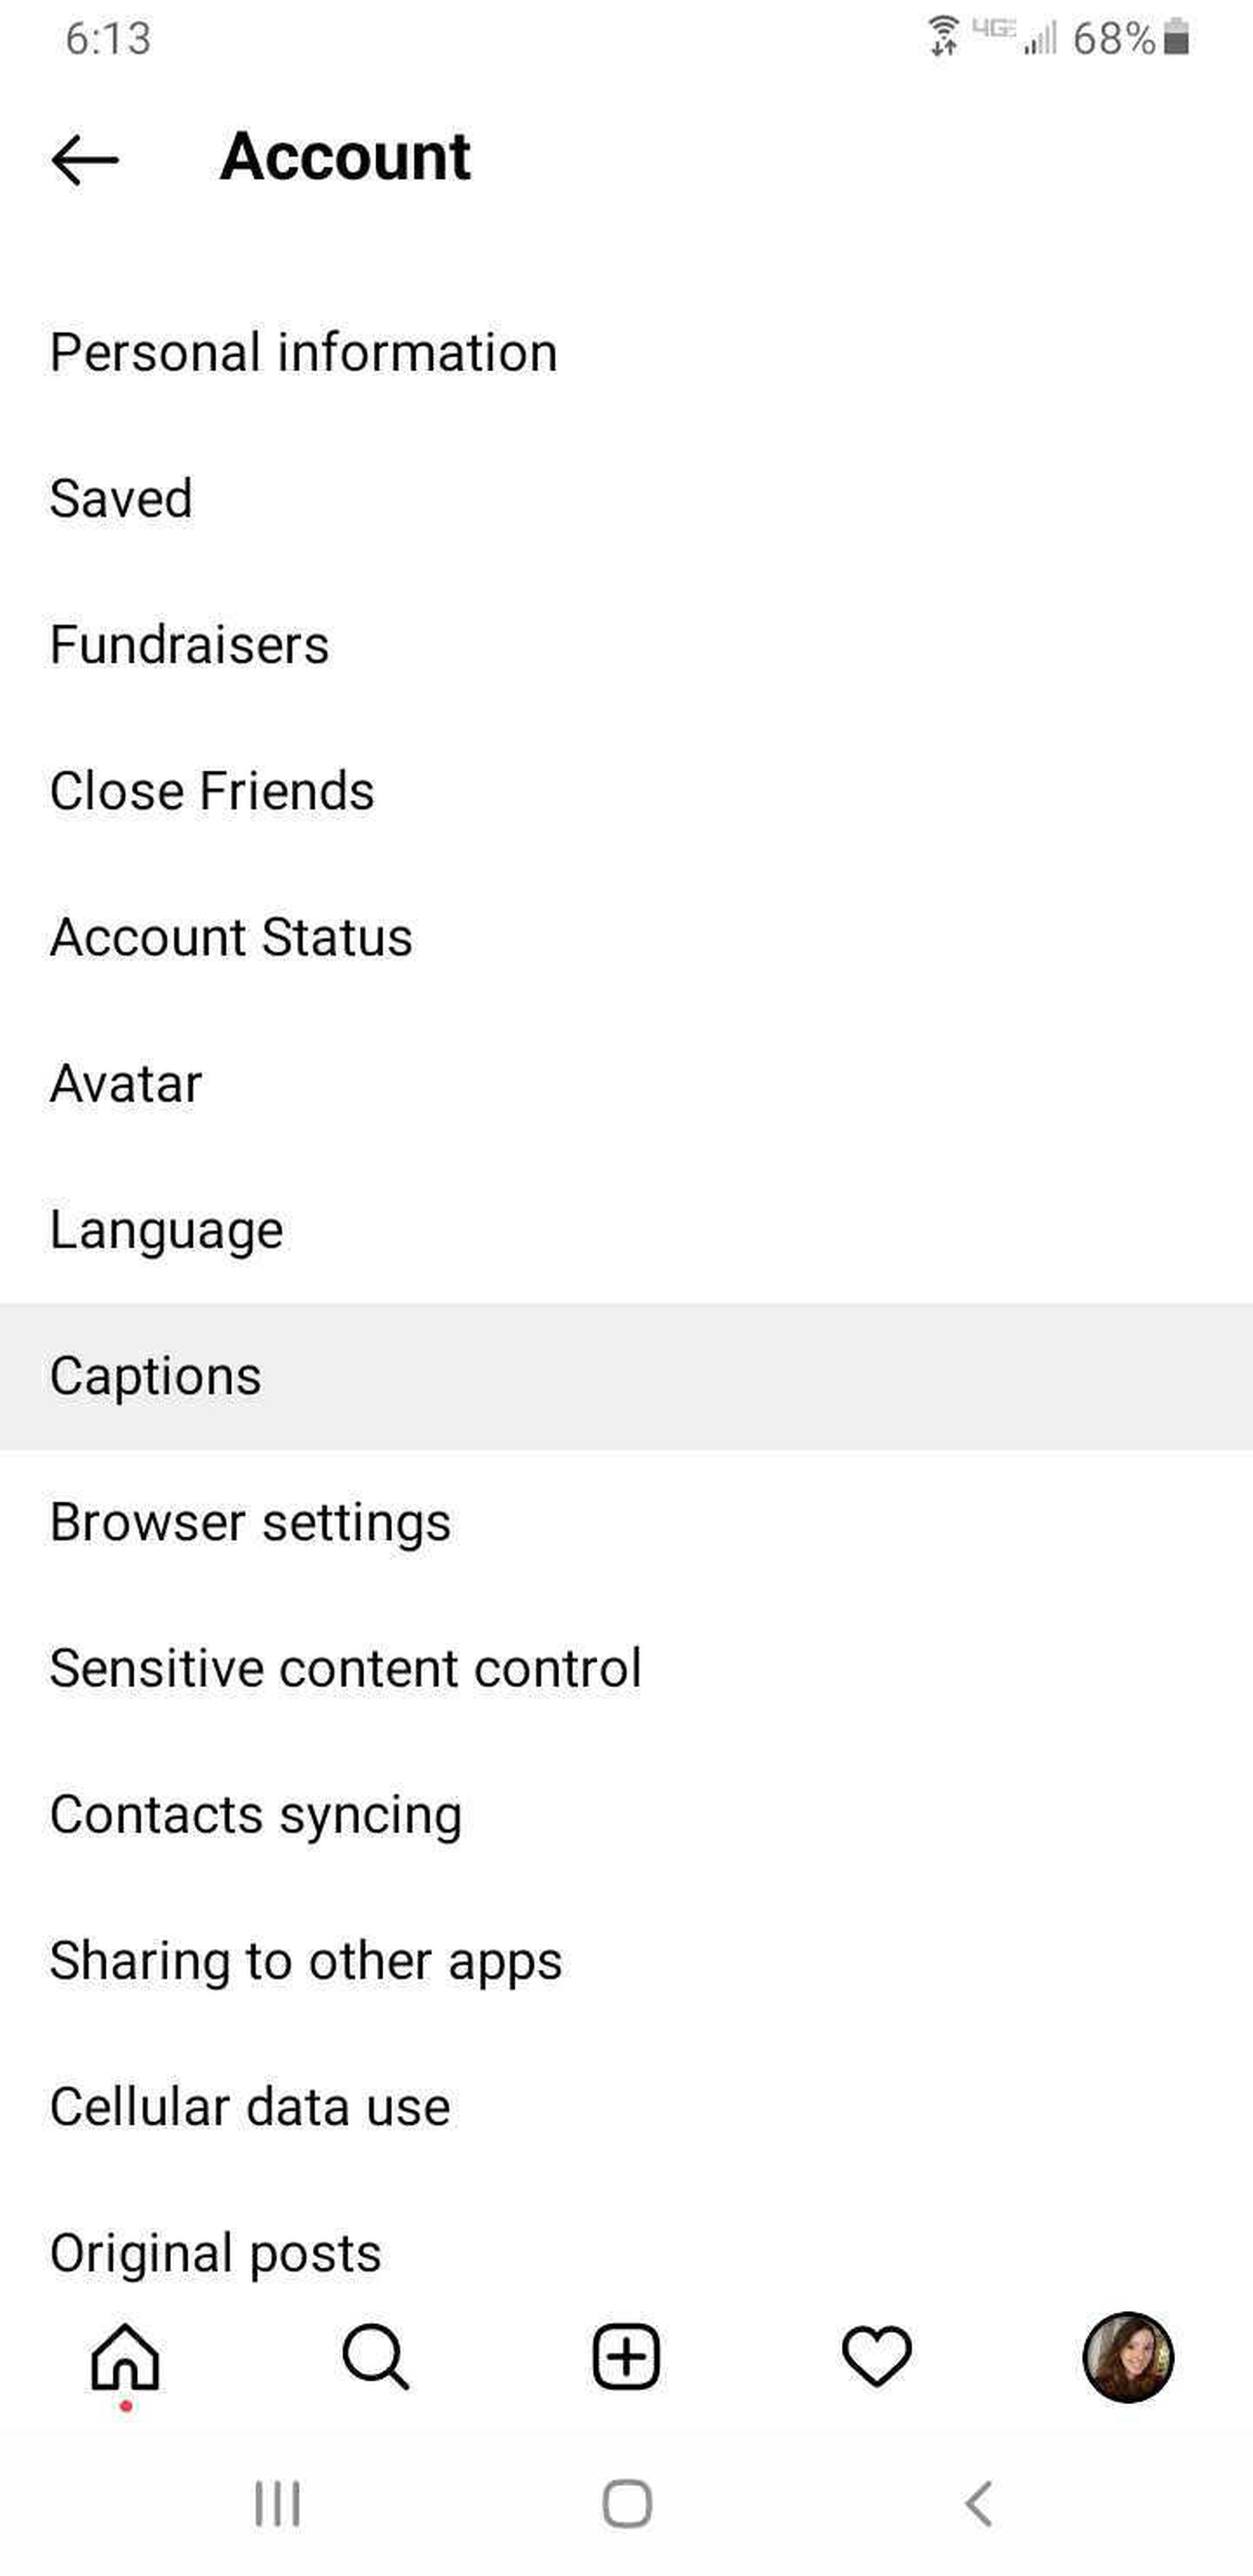 Choose “Captions” from your account settings.